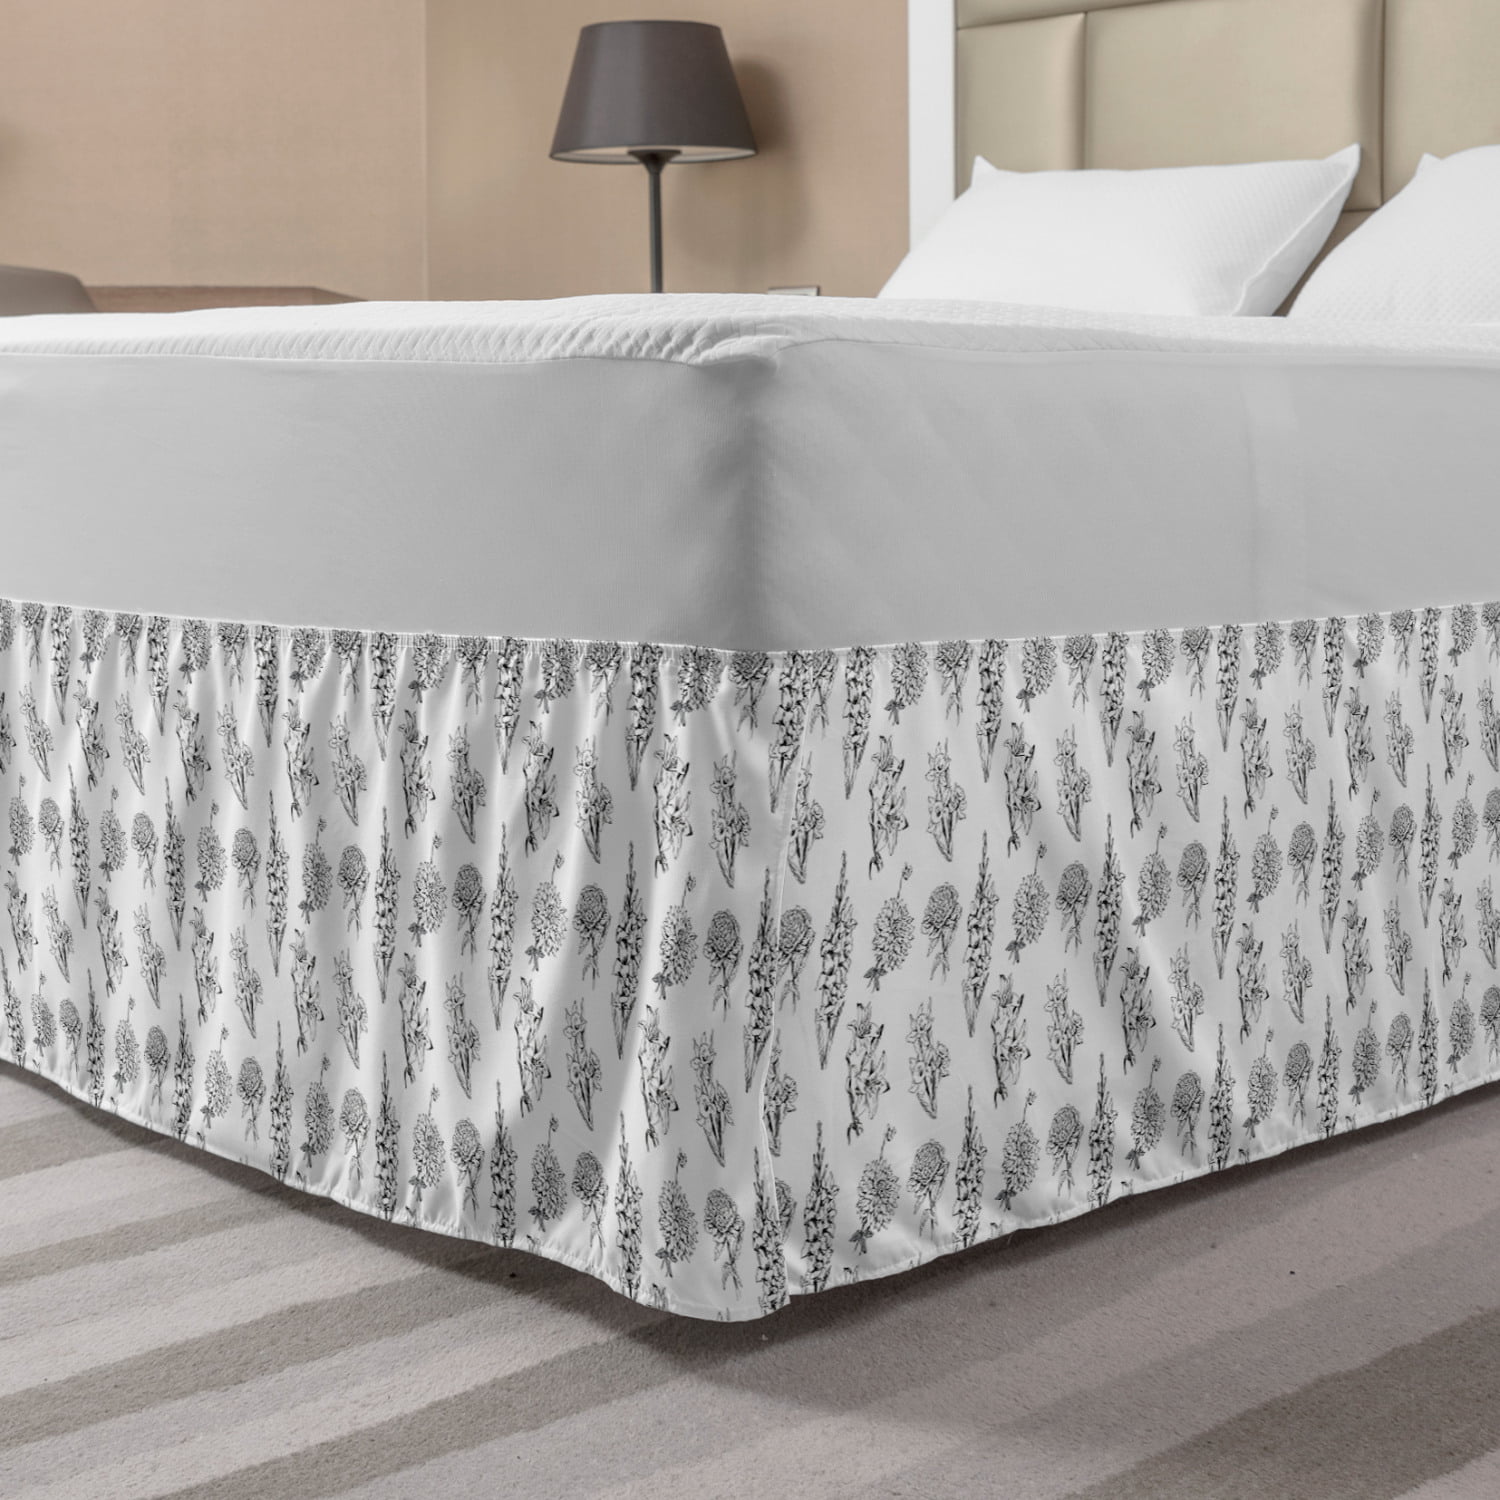 Floral Bed Skirt, Detailed Realistically Drawn Flowers and Leaves in ...